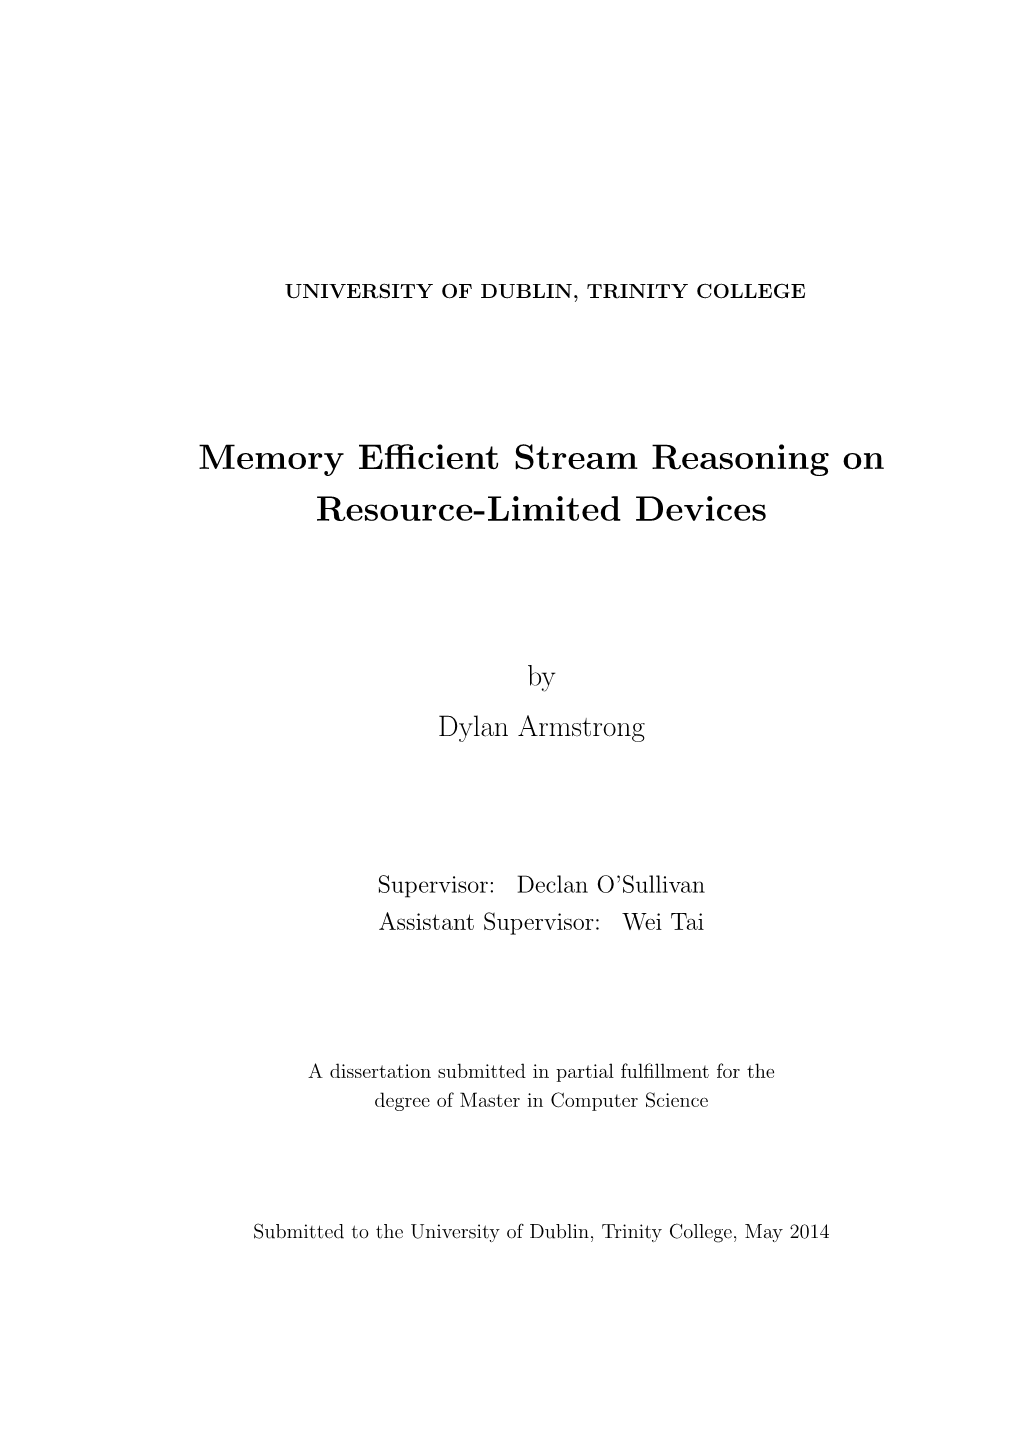 Memory Efficient Stream Reasoning on Resource-Limited Devices